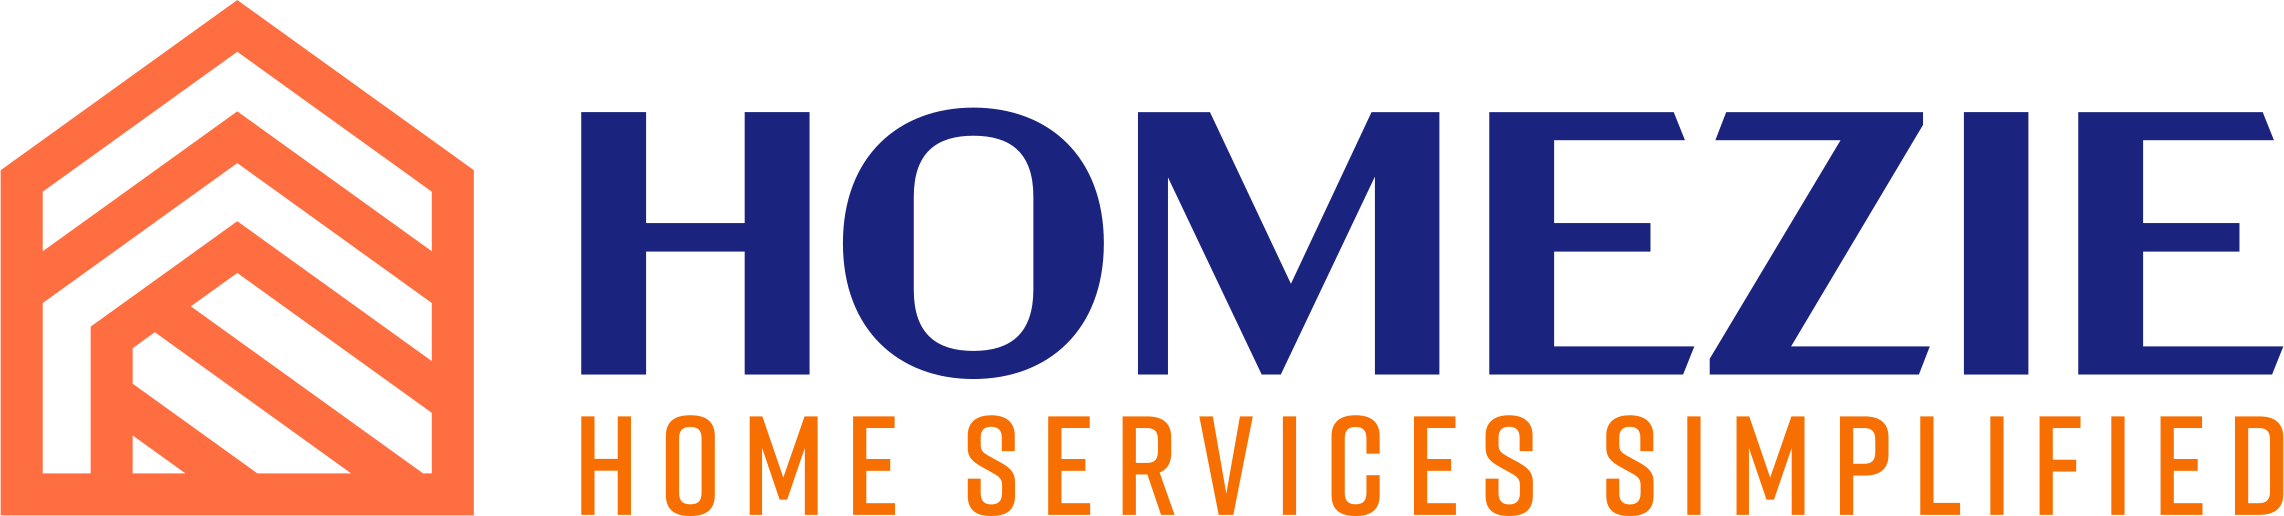 Home Services in Mason, OH | Homezie - Your One-Stop Shop